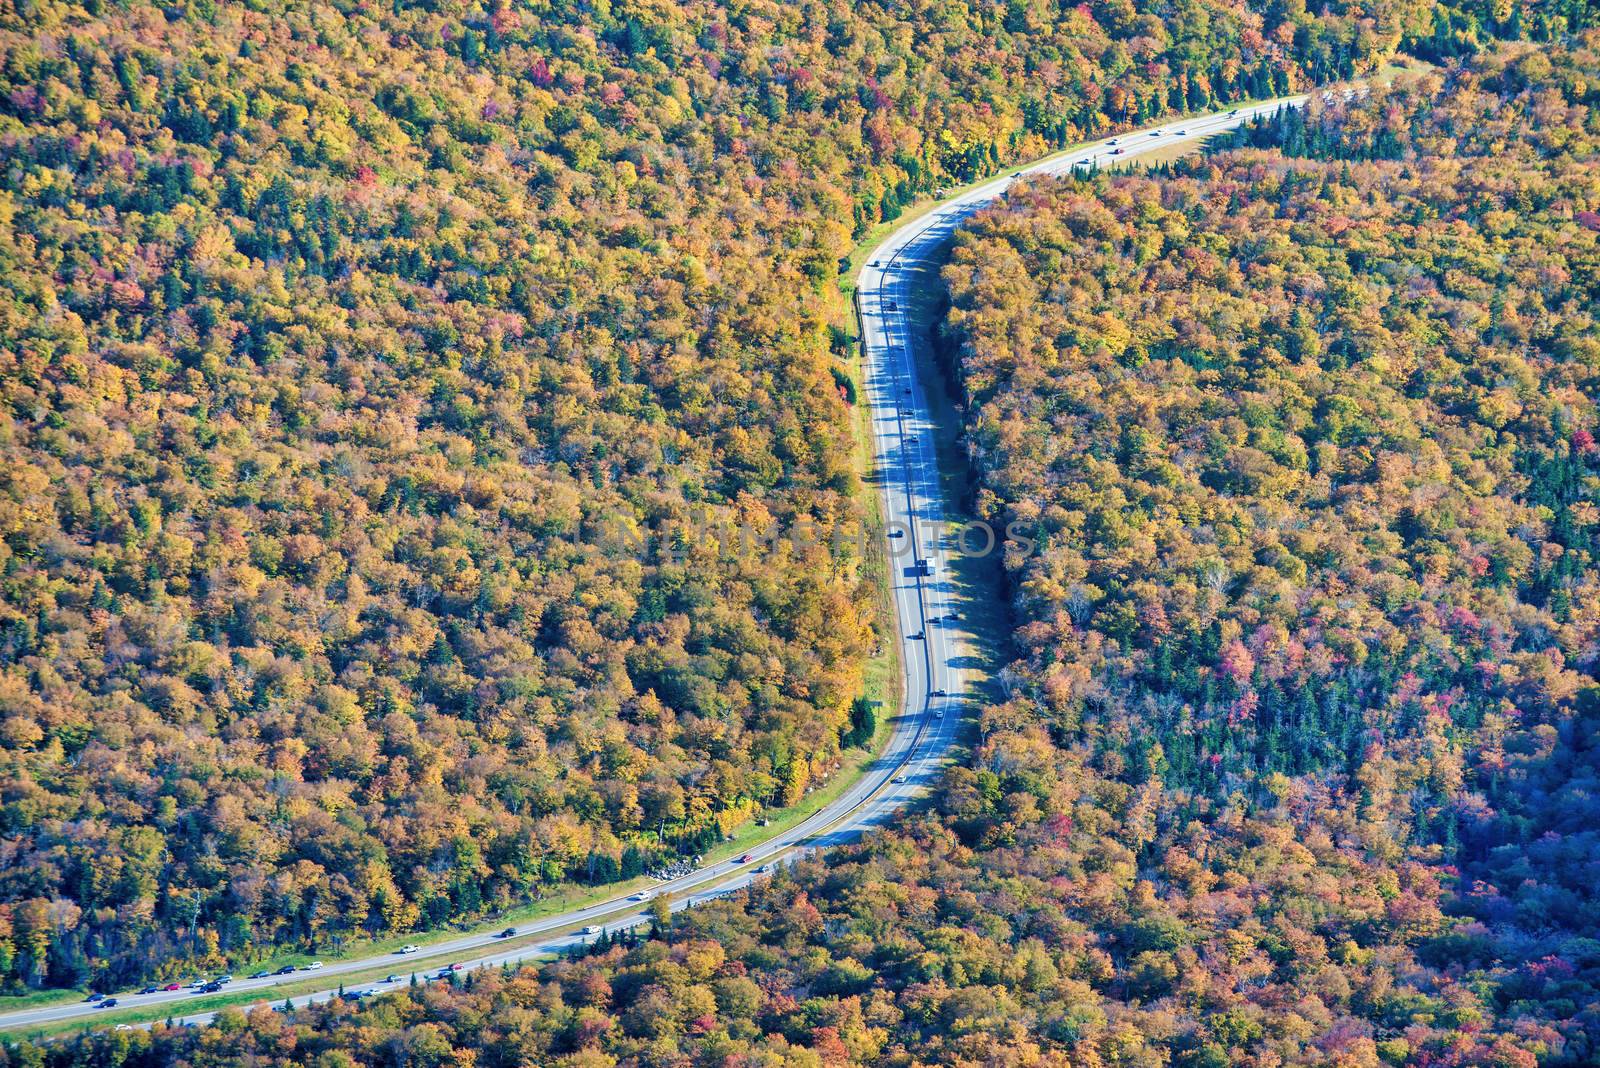 Road across New England countryside in foliage season, USA by jovannig